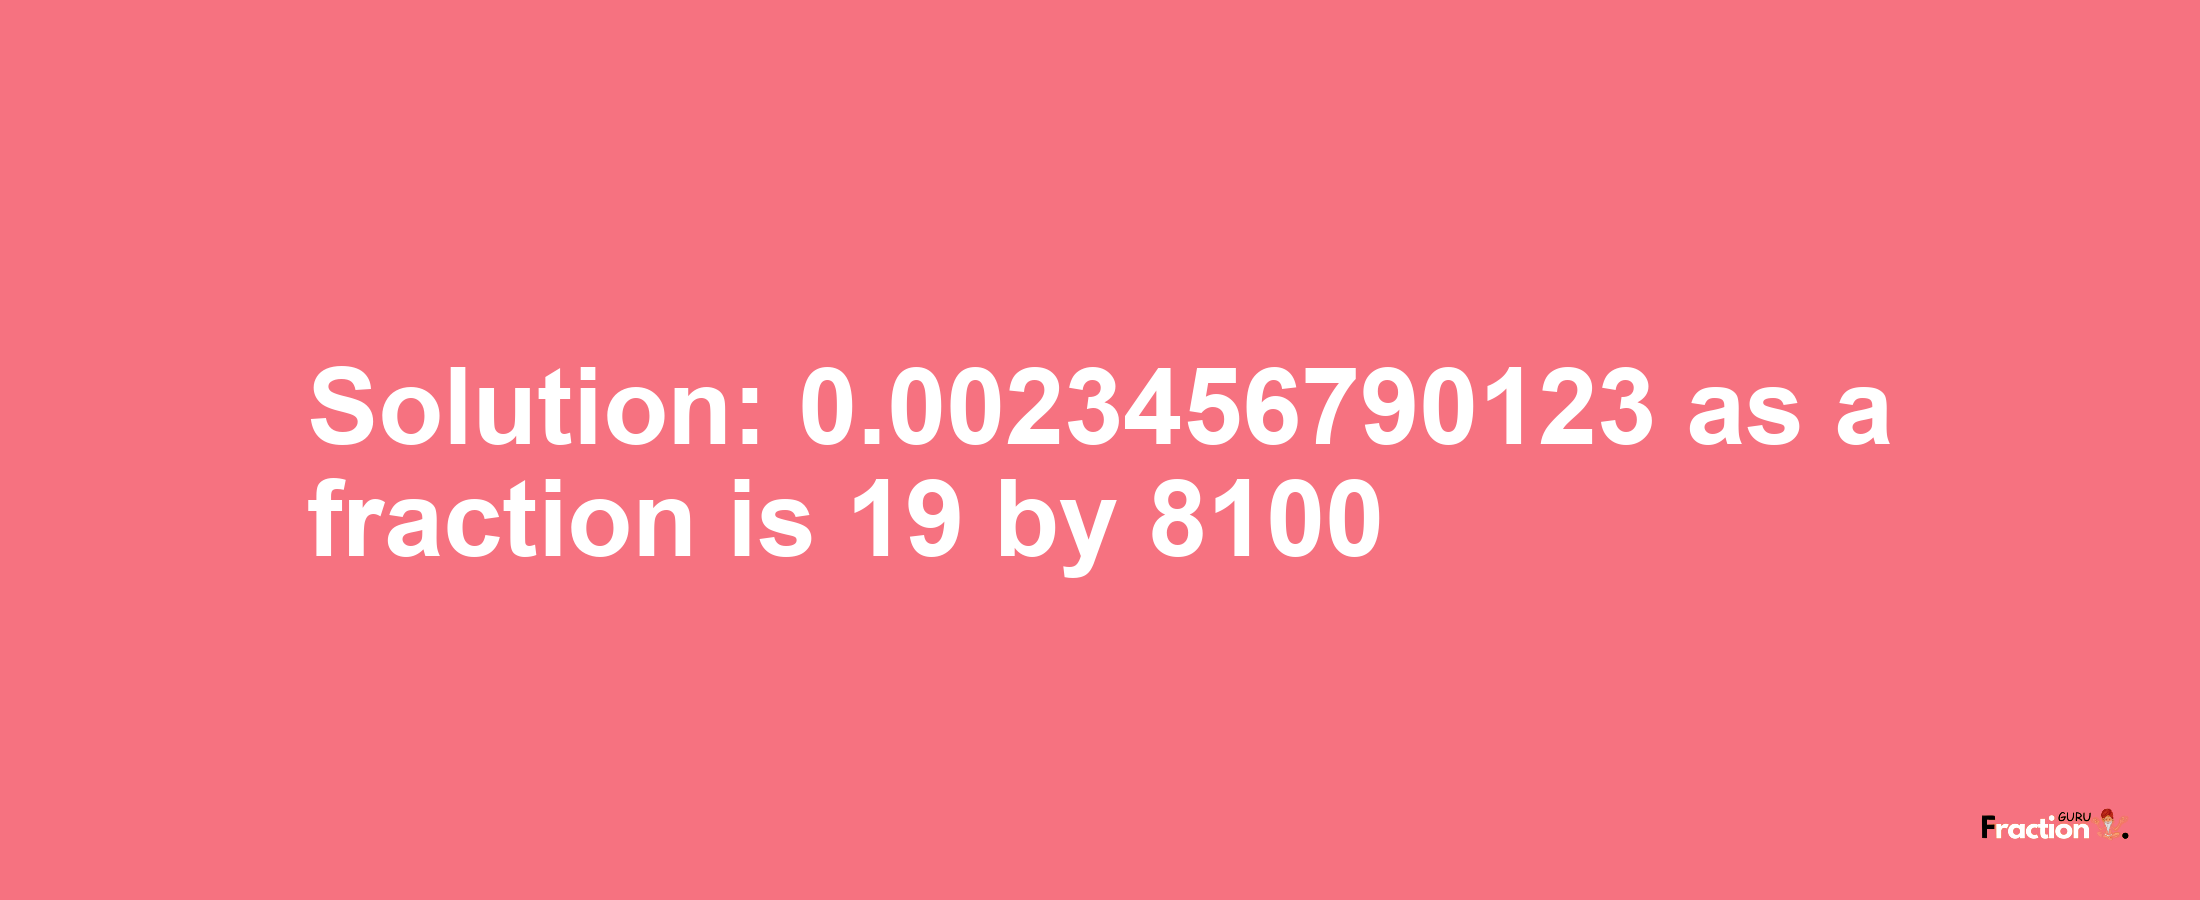 Solution:0.0023456790123 as a fraction is 19/8100